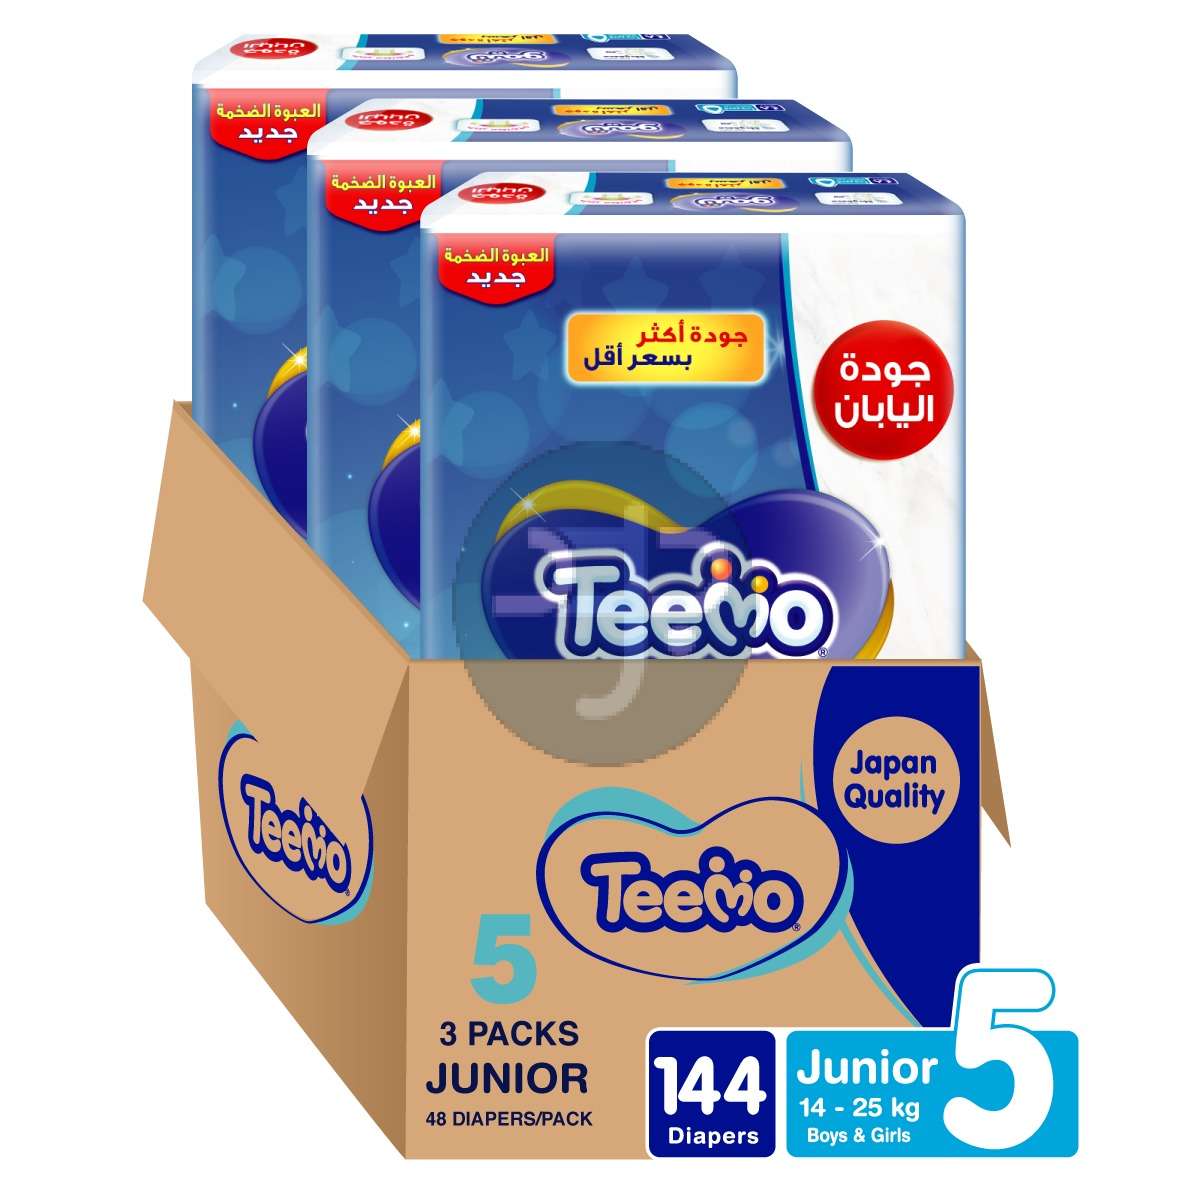 Product-Teemo Baby Diapers, Size 5, Junior, 14-25 kg, Mega Box, 144 Diapers